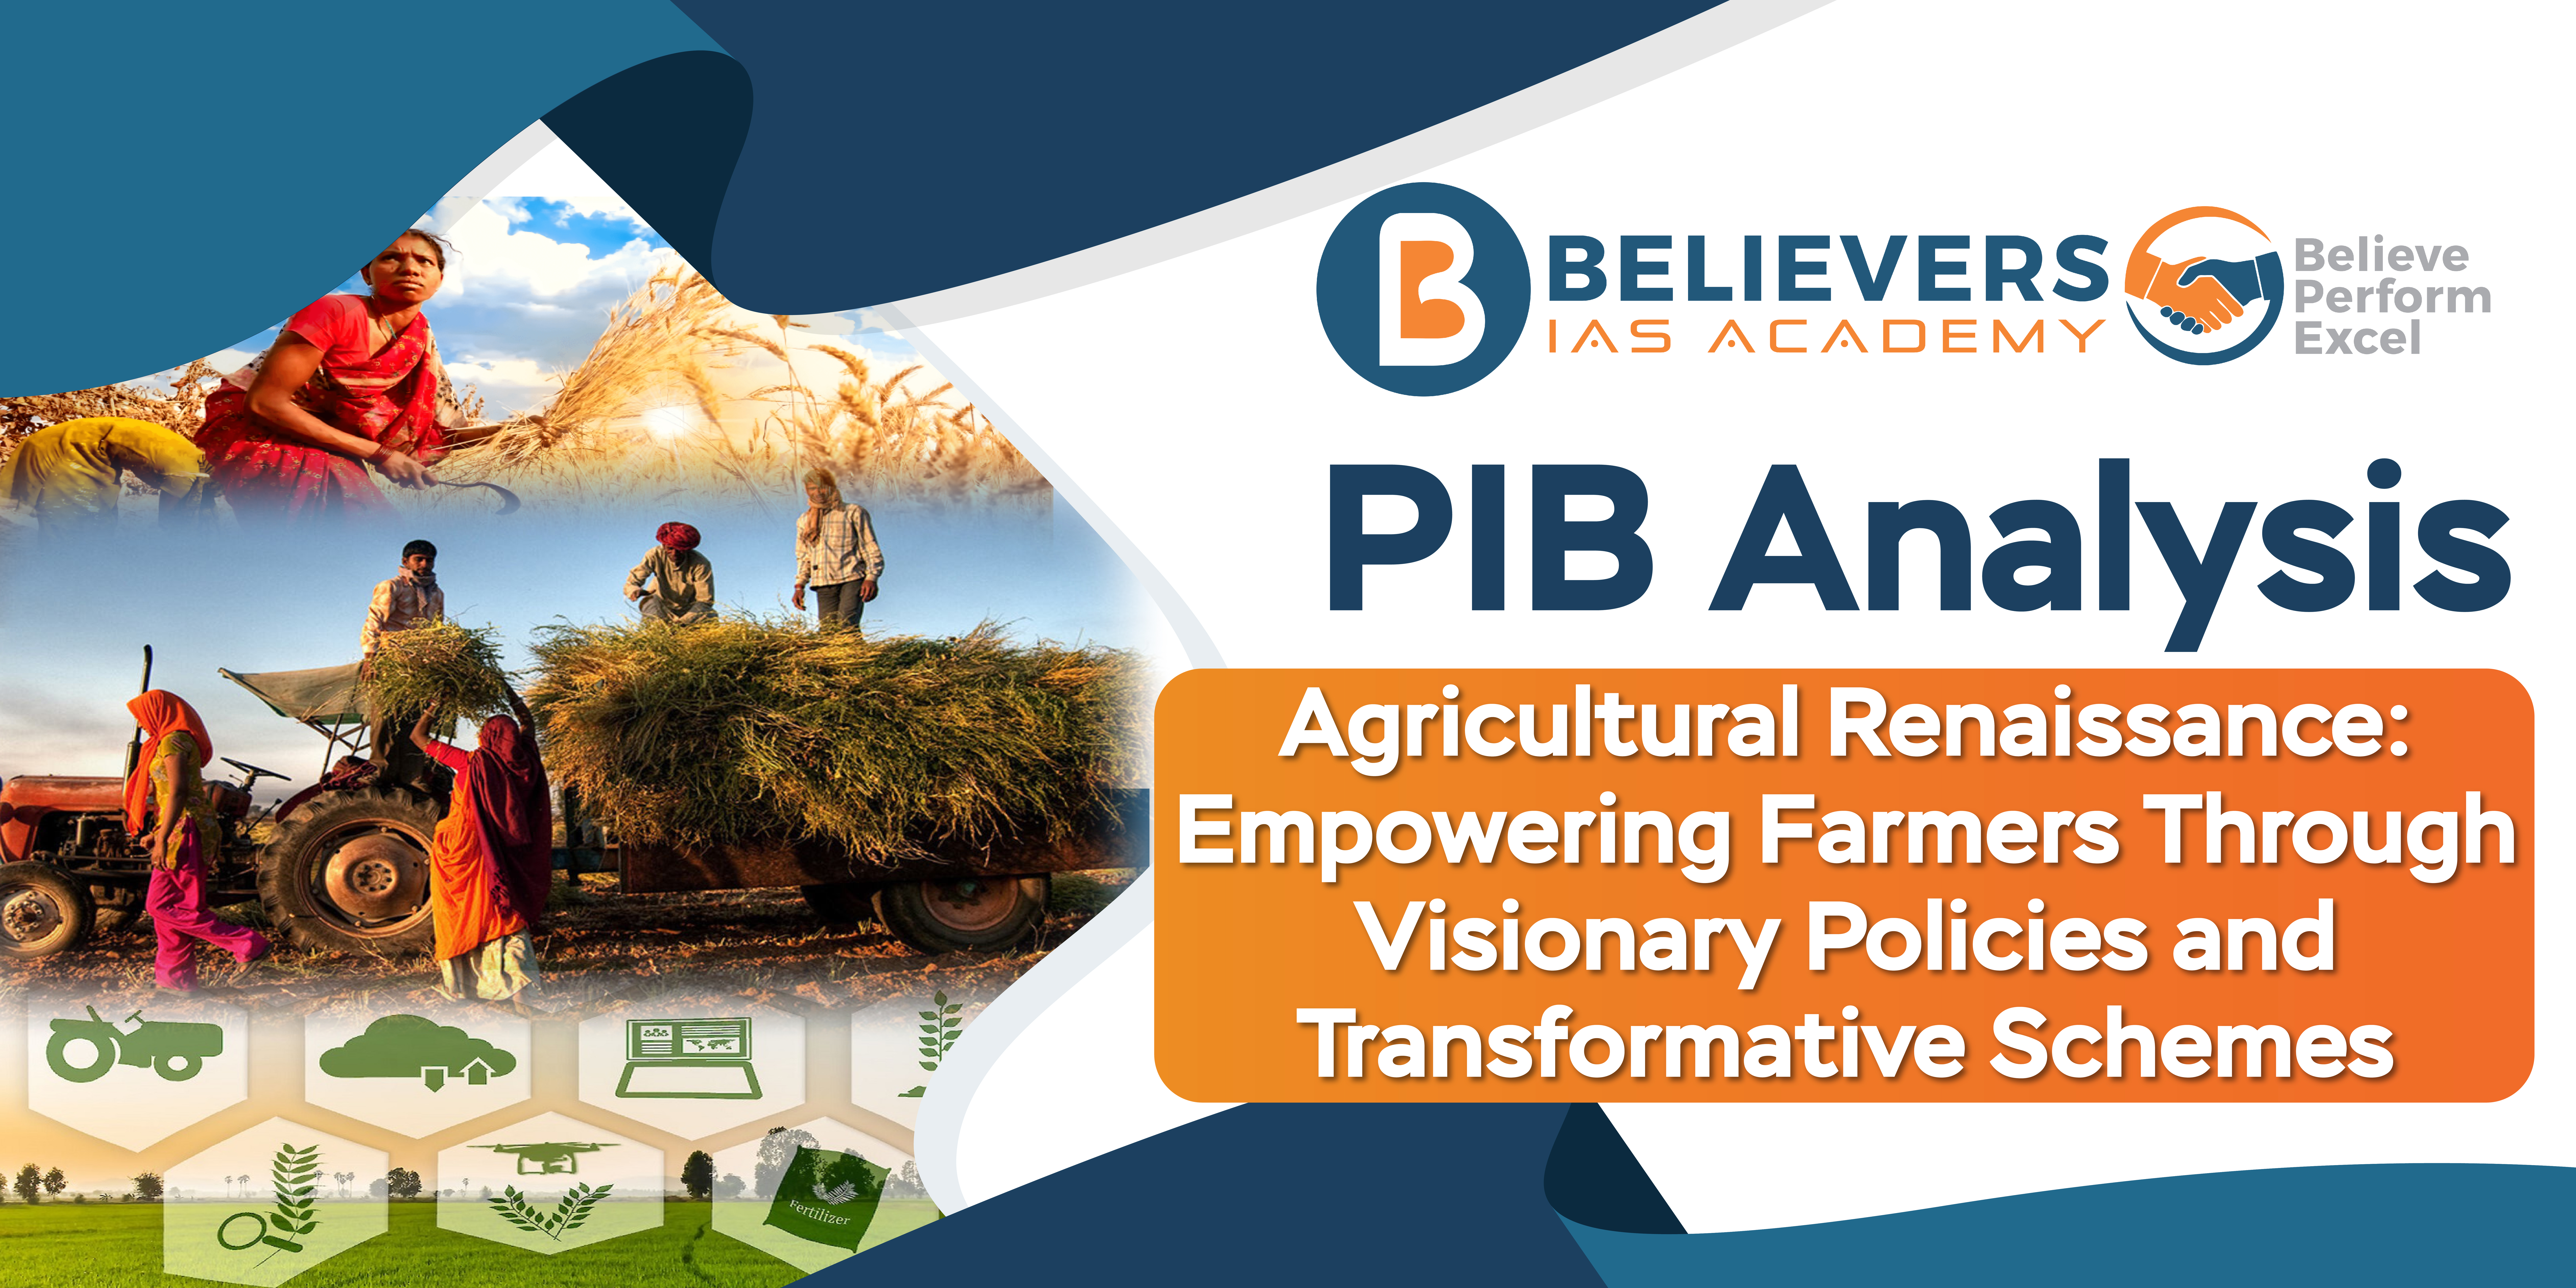 Agricultural Renaissance: Empowering Farmers Through Visionary Policies and Transformative Schemes